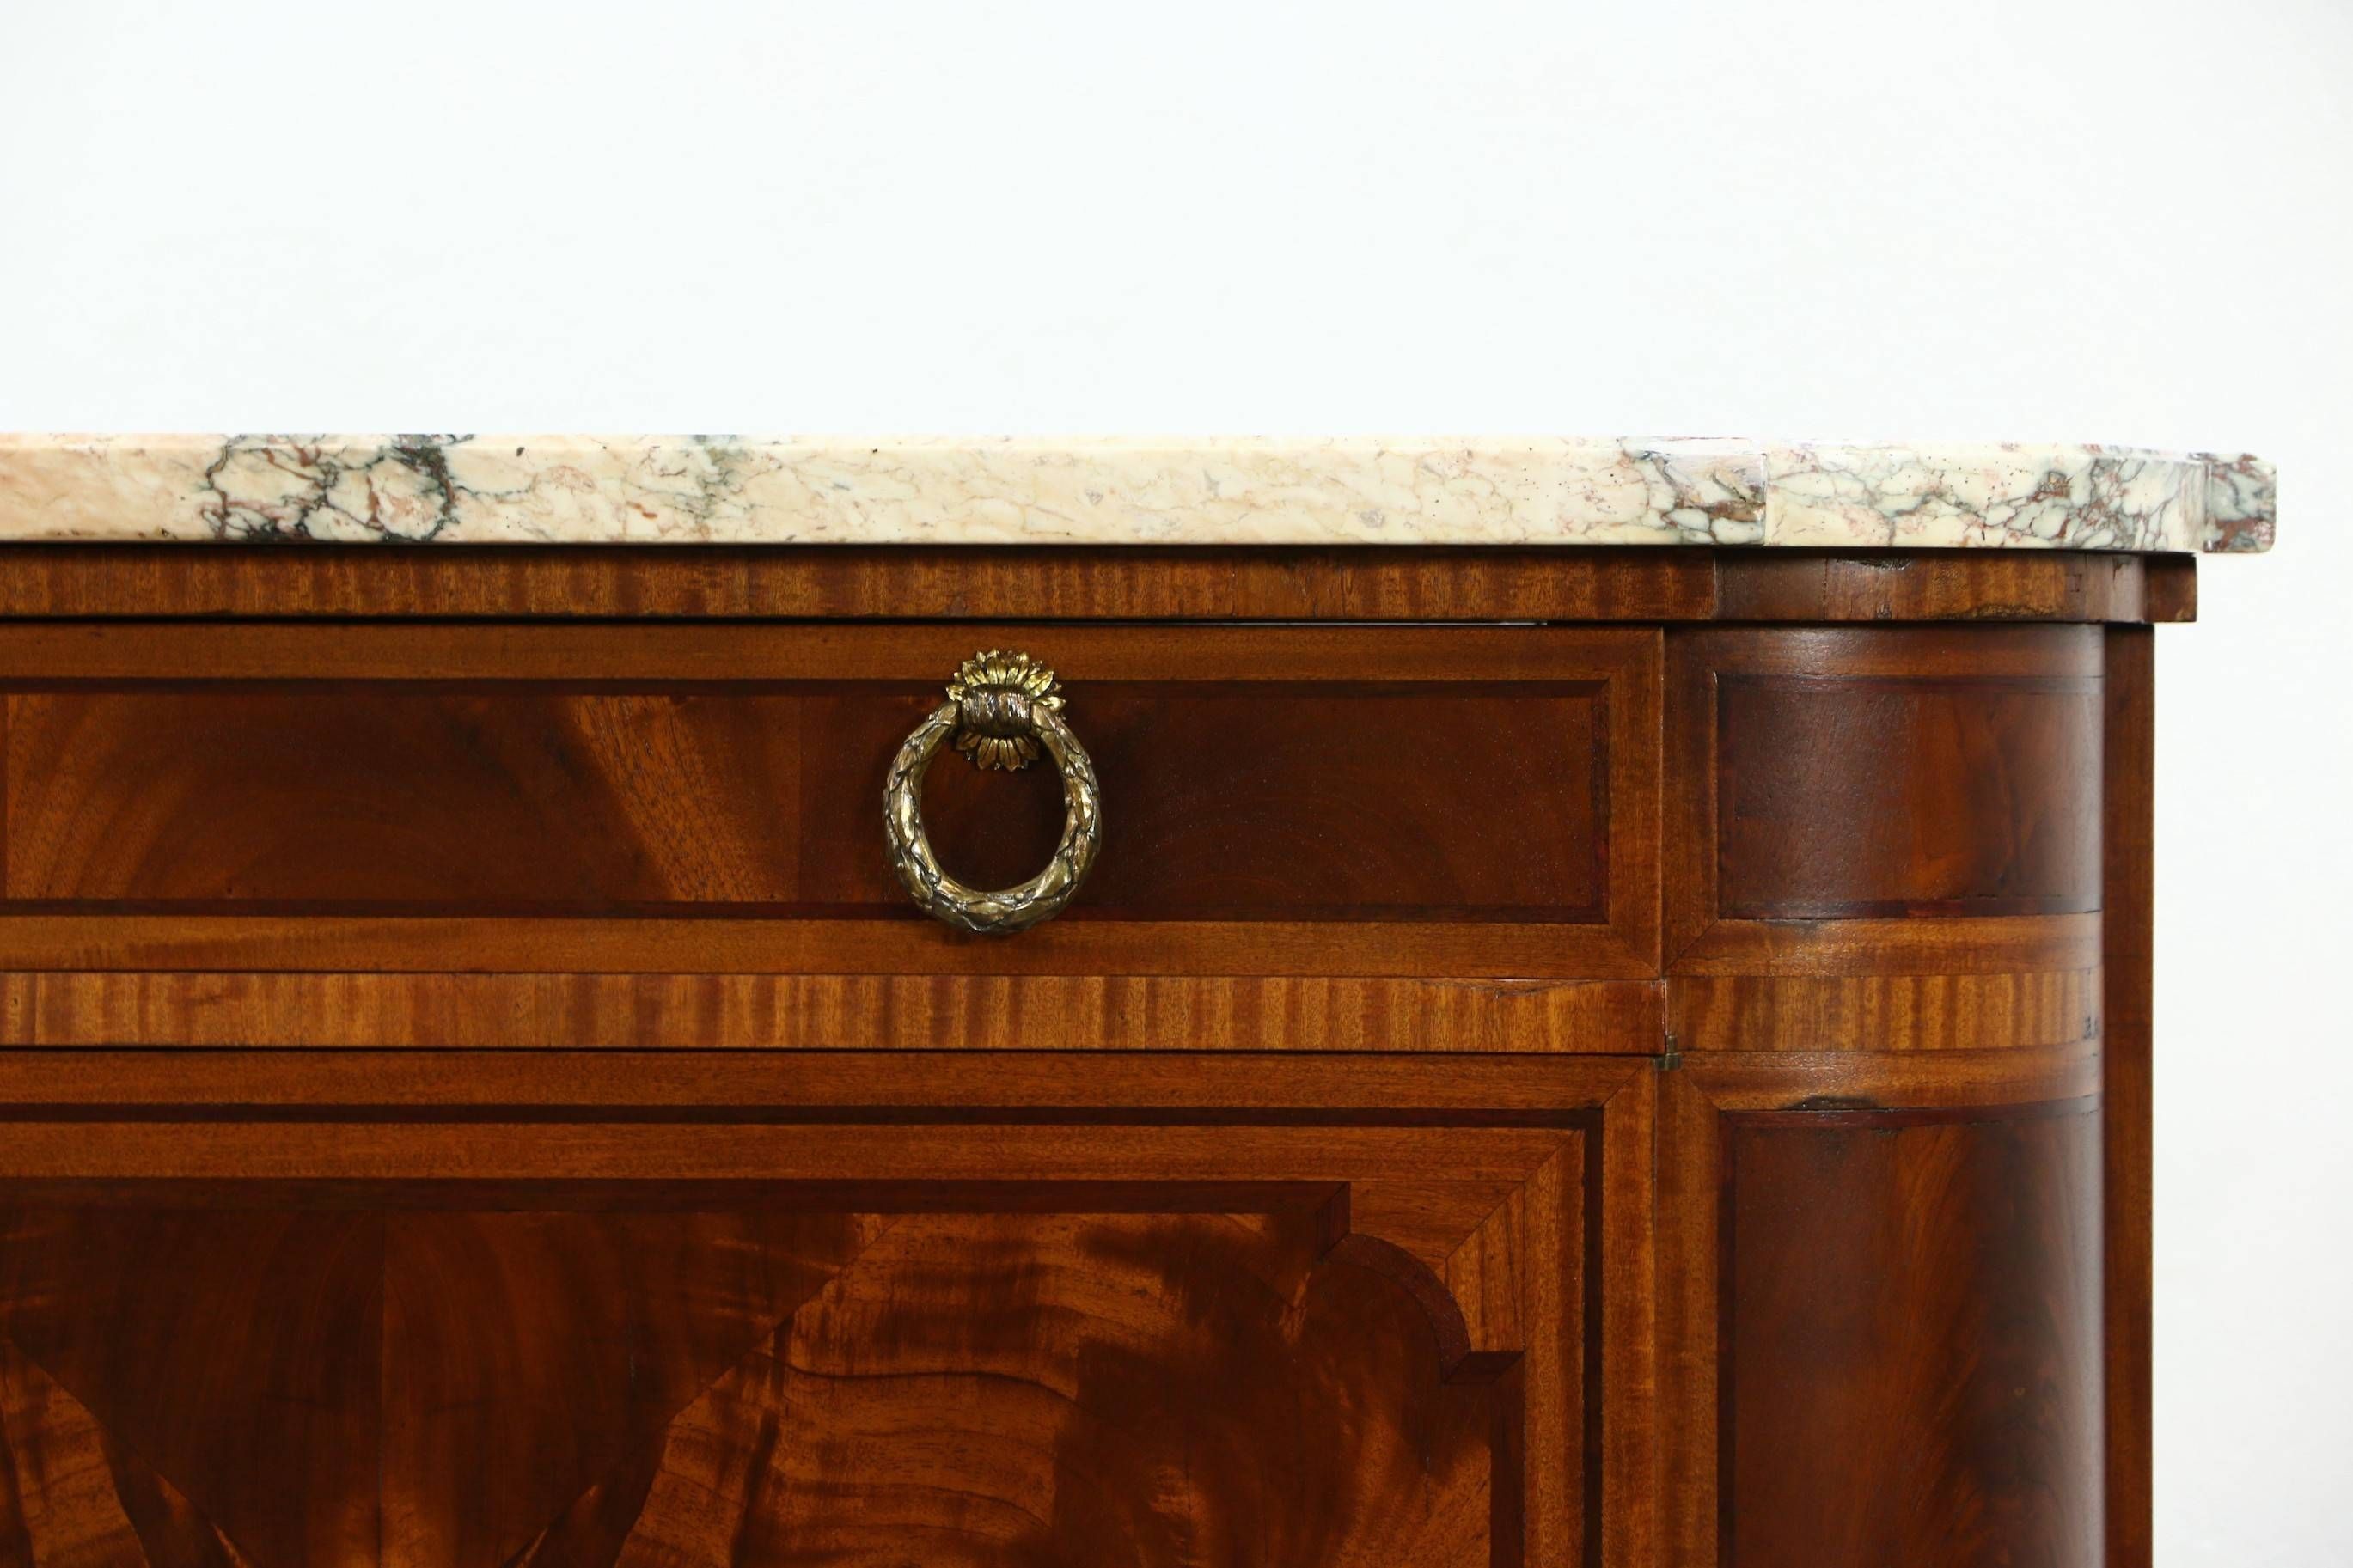 Sold – Marble Top Paris France Signed 1930 Vintage Sideboard Regarding Best And Newest Antique Marble Top Sideboards (View 13 of 15)